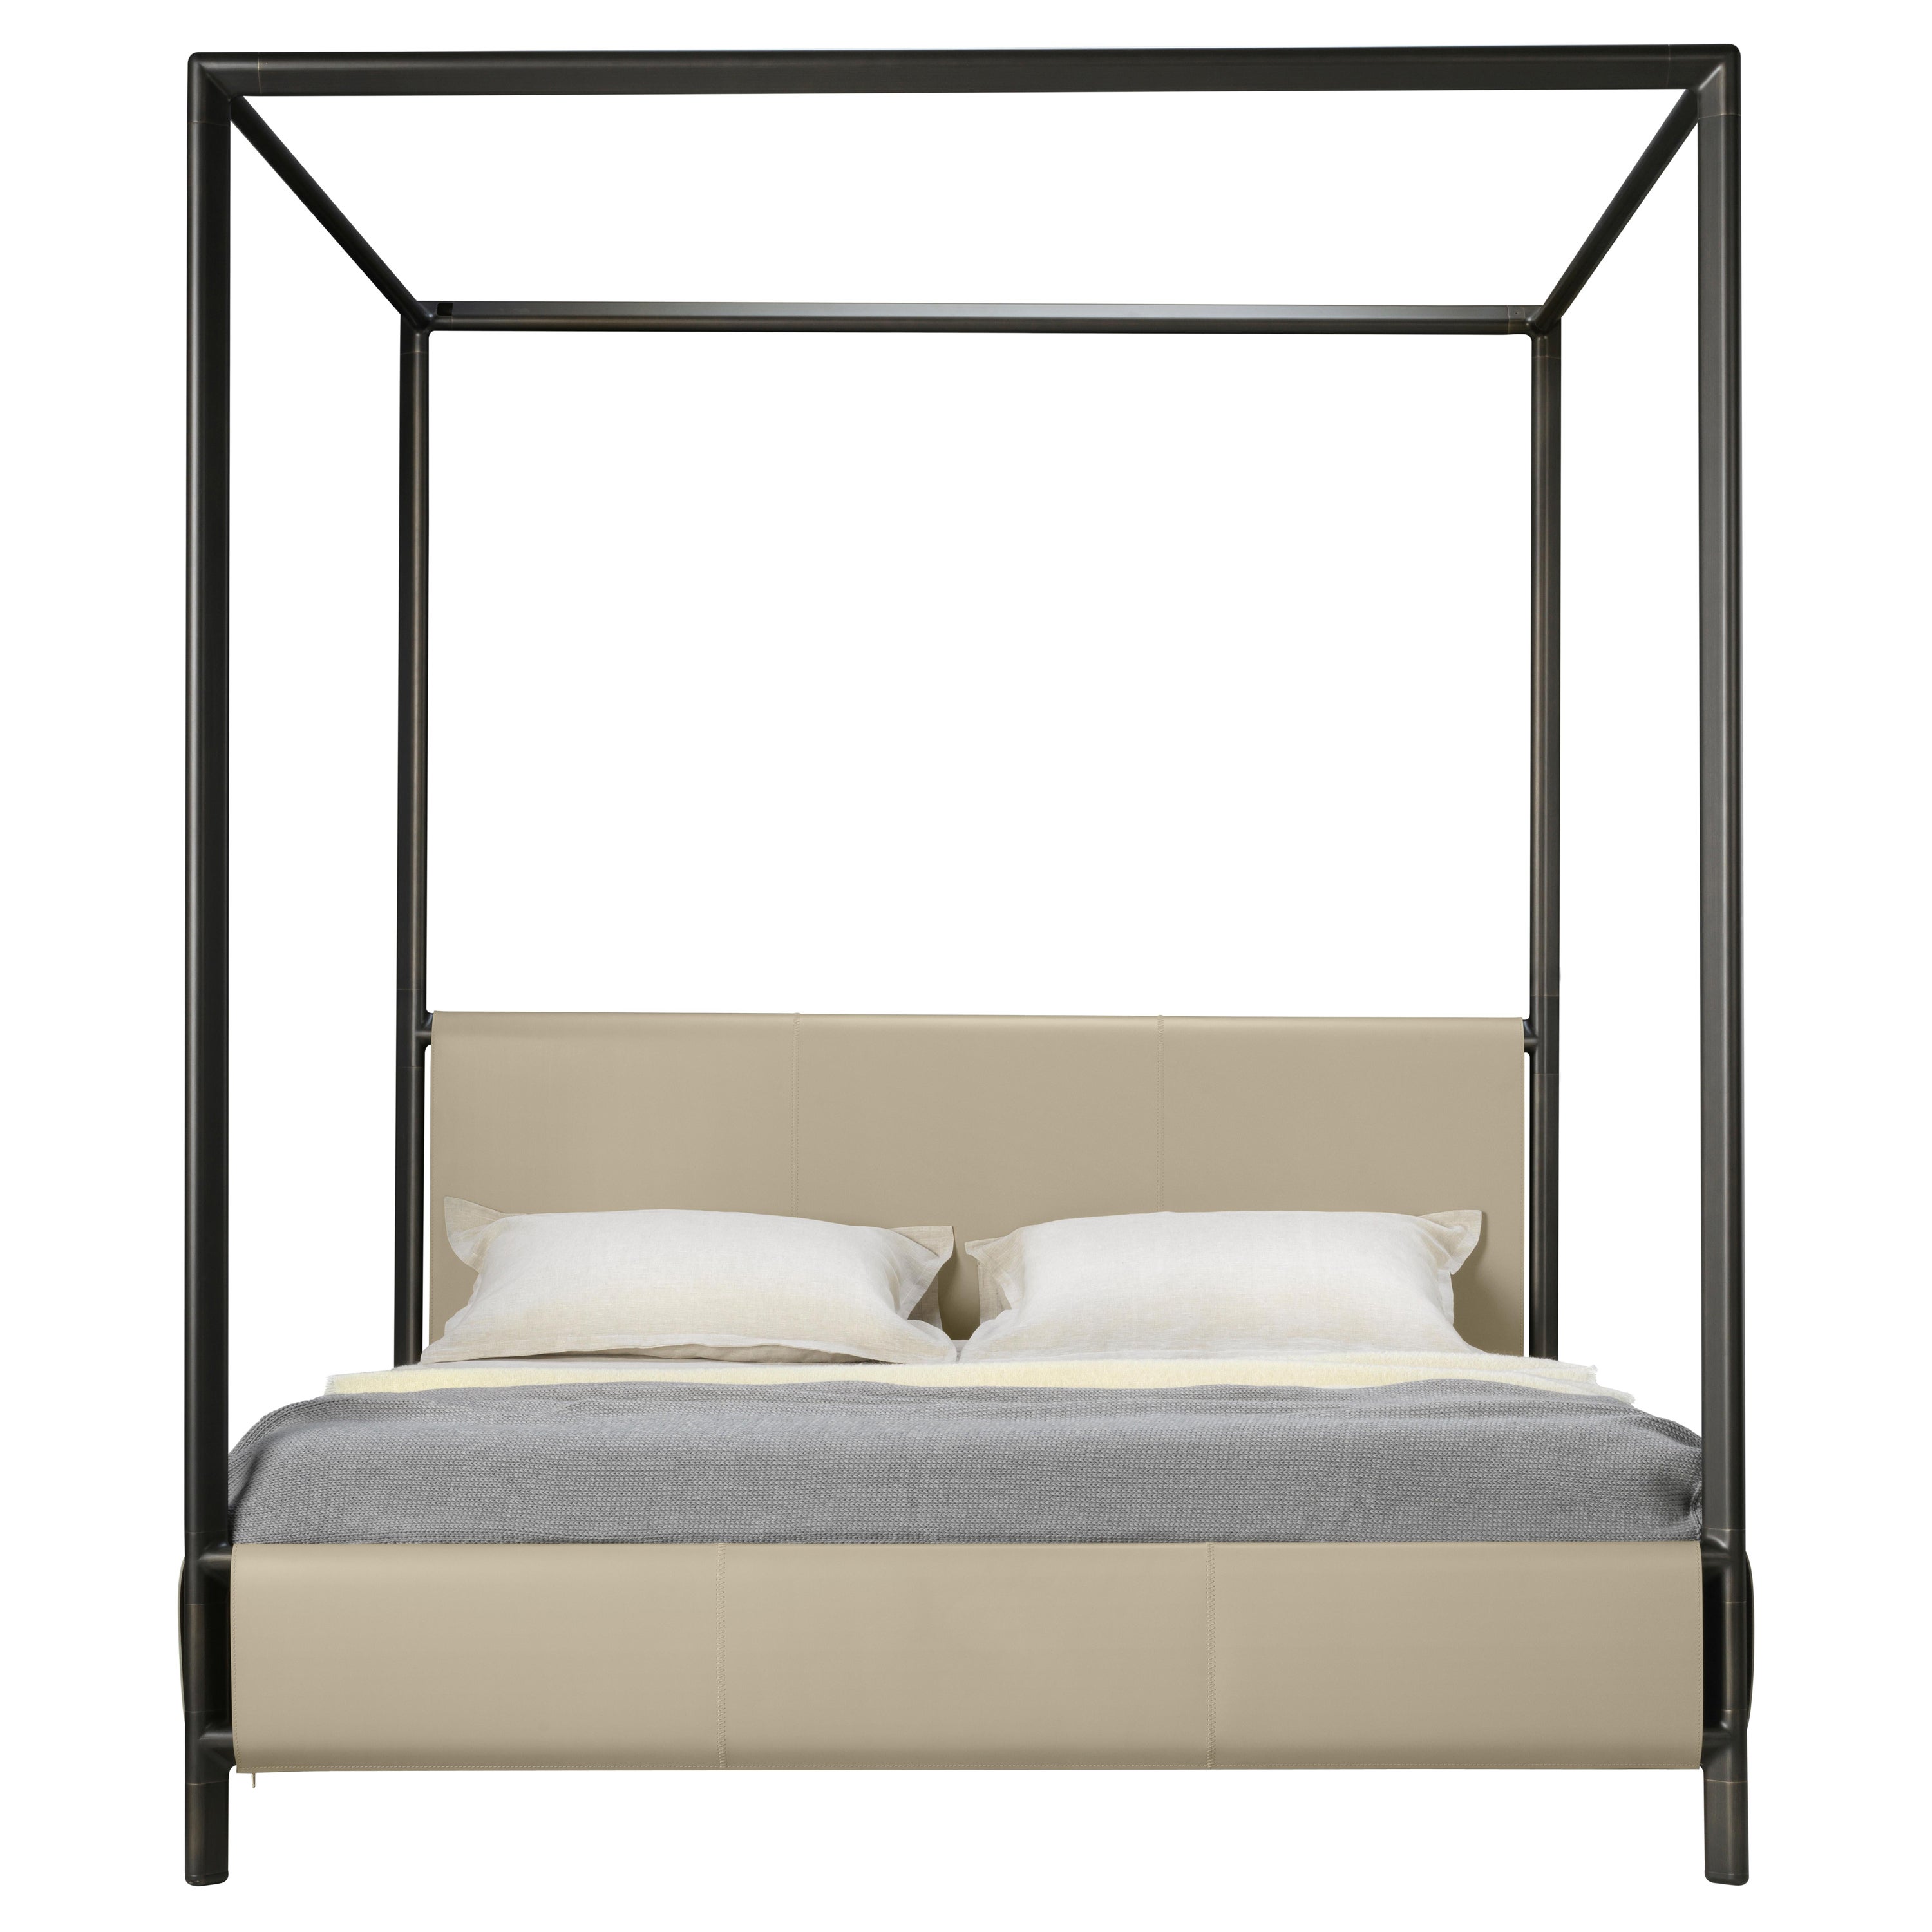 Frame Canopy Bed, Hardleather Nocciola, Burnished Brass Structure, Made in Italy